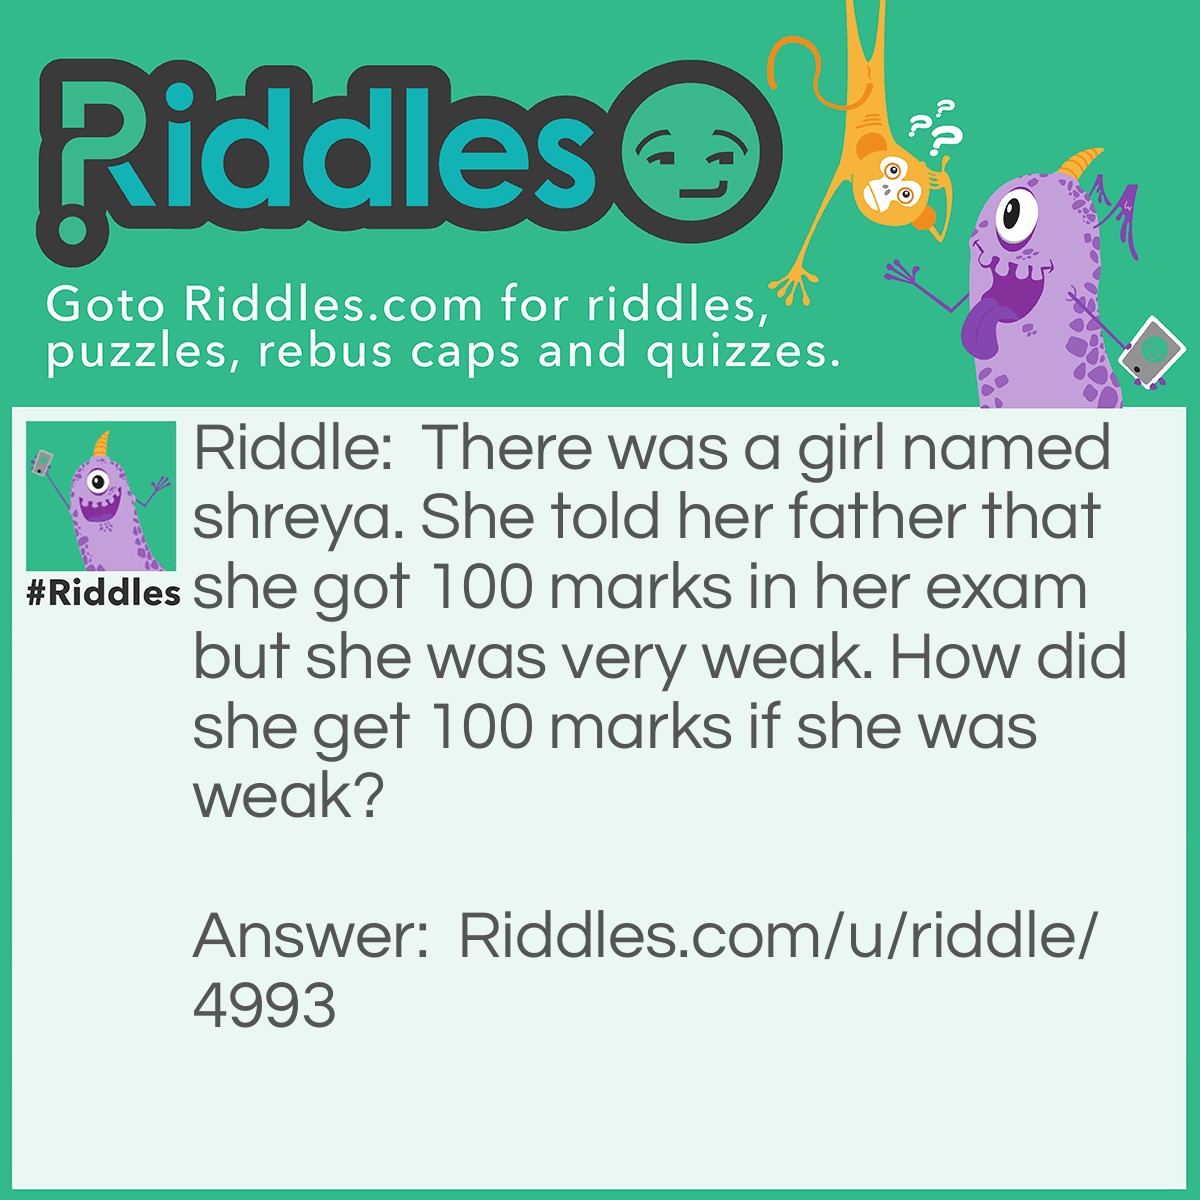 Riddle: There was a girl named shreya. She told her father that she got 100 marks in her exam but she was very weak. How did she get 100 marks if she was weak? Answer: 20 for science 10 for maths 40 for hindi 20 for english 5 for sst 5 for computers = 100.